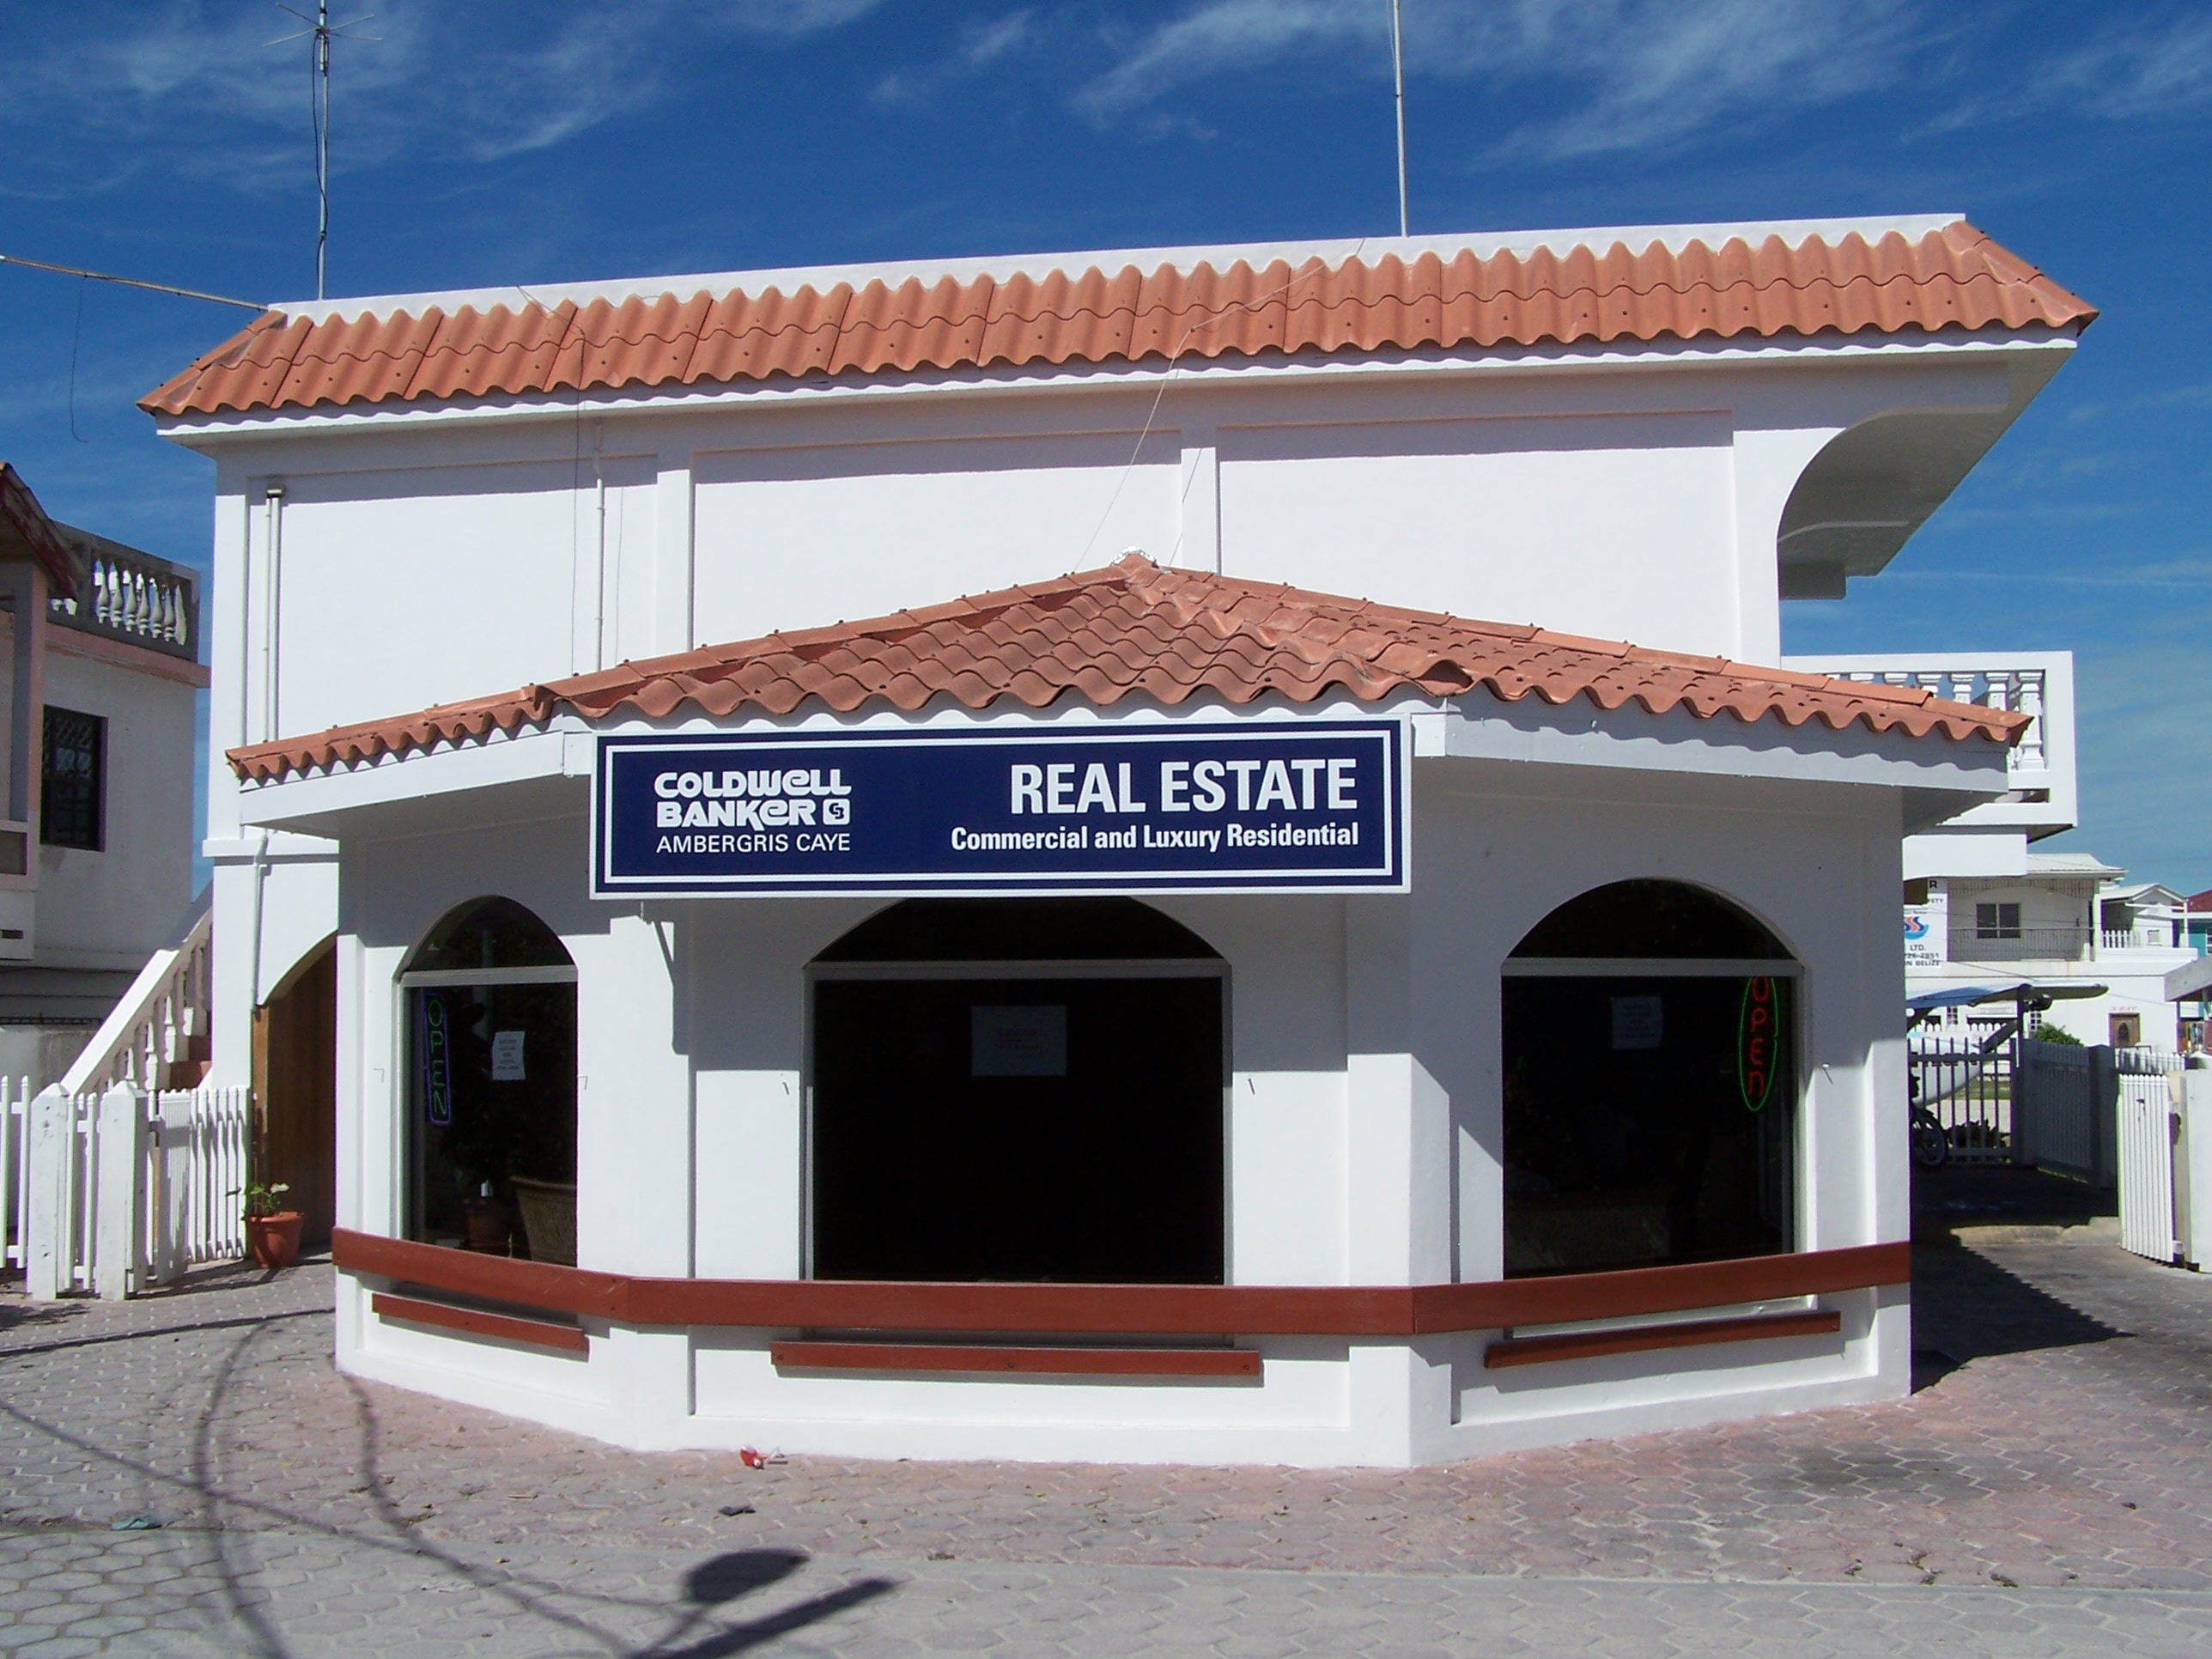 Coldwell Banker Ambergris Caye office